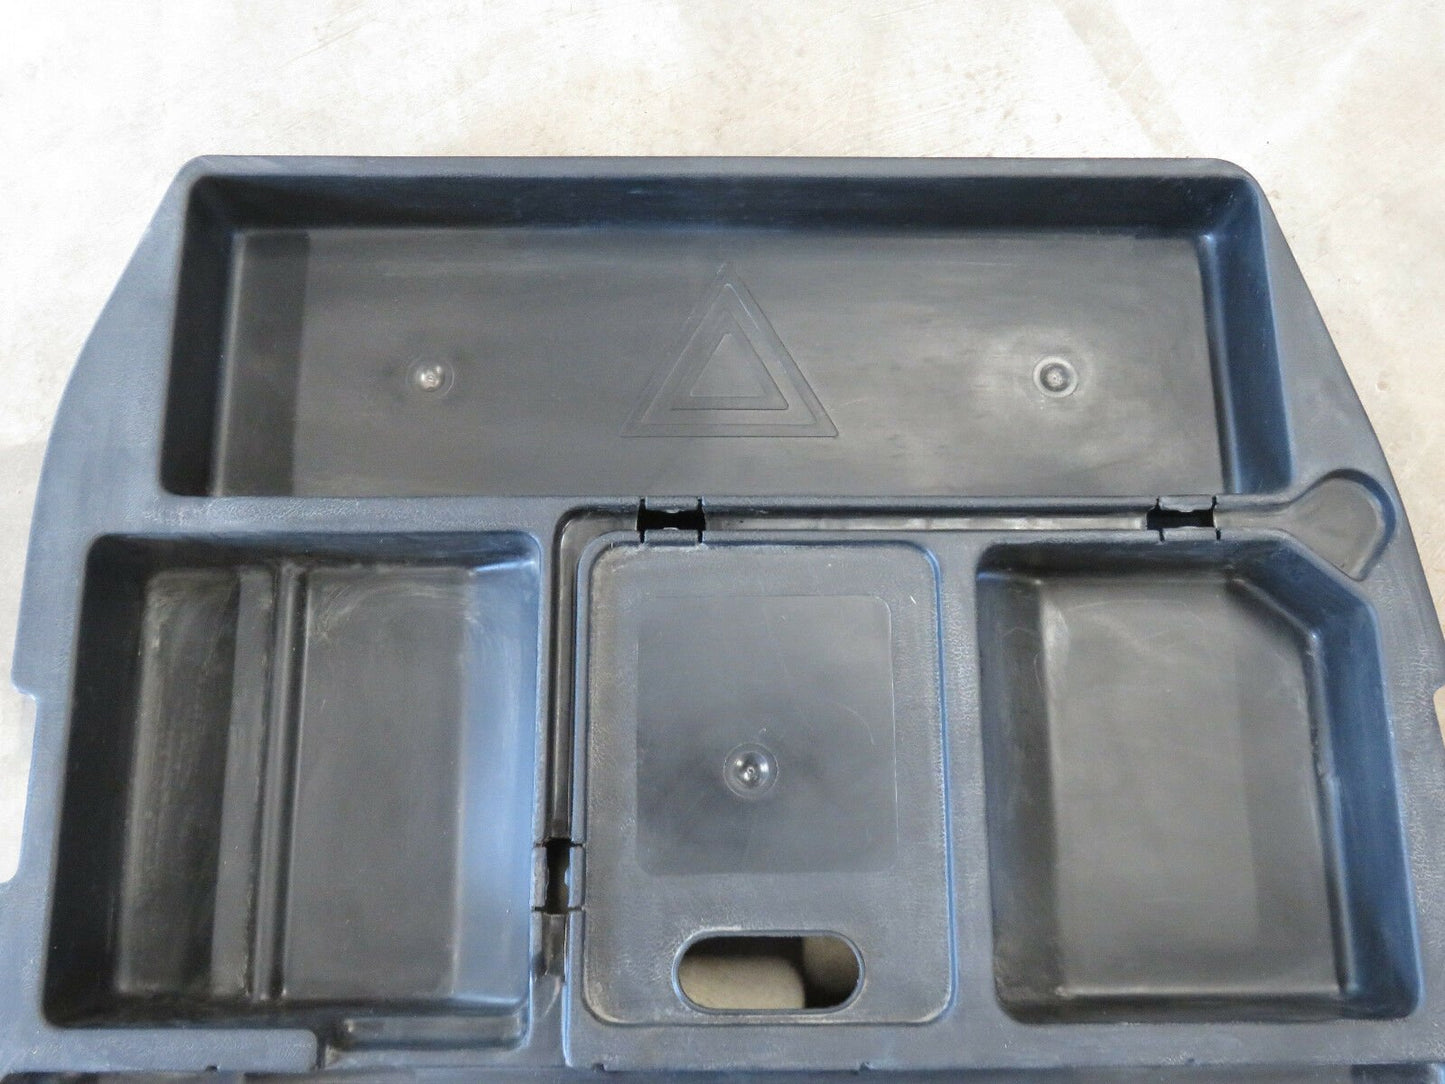 1996-1999 Subaru Legacy Outback Trunk Tray Storage Compartment Spare Tire Cover